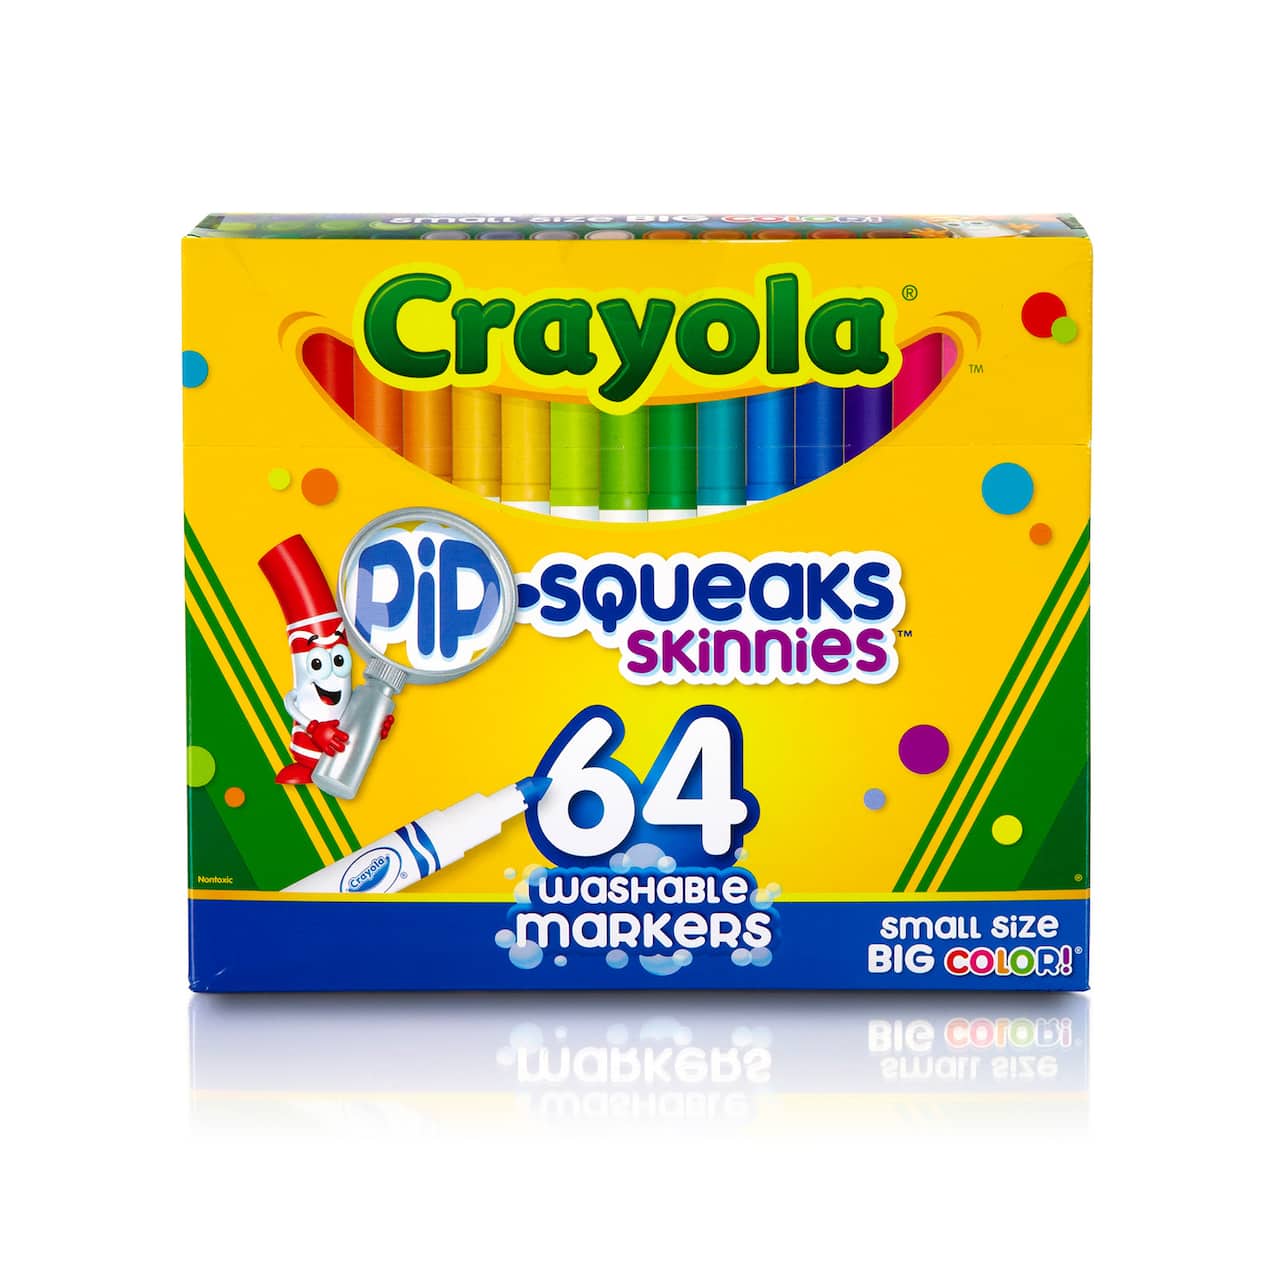 Crayola® Pip-Squeaks™ Skinnies™ Washable Markers, 64 Count